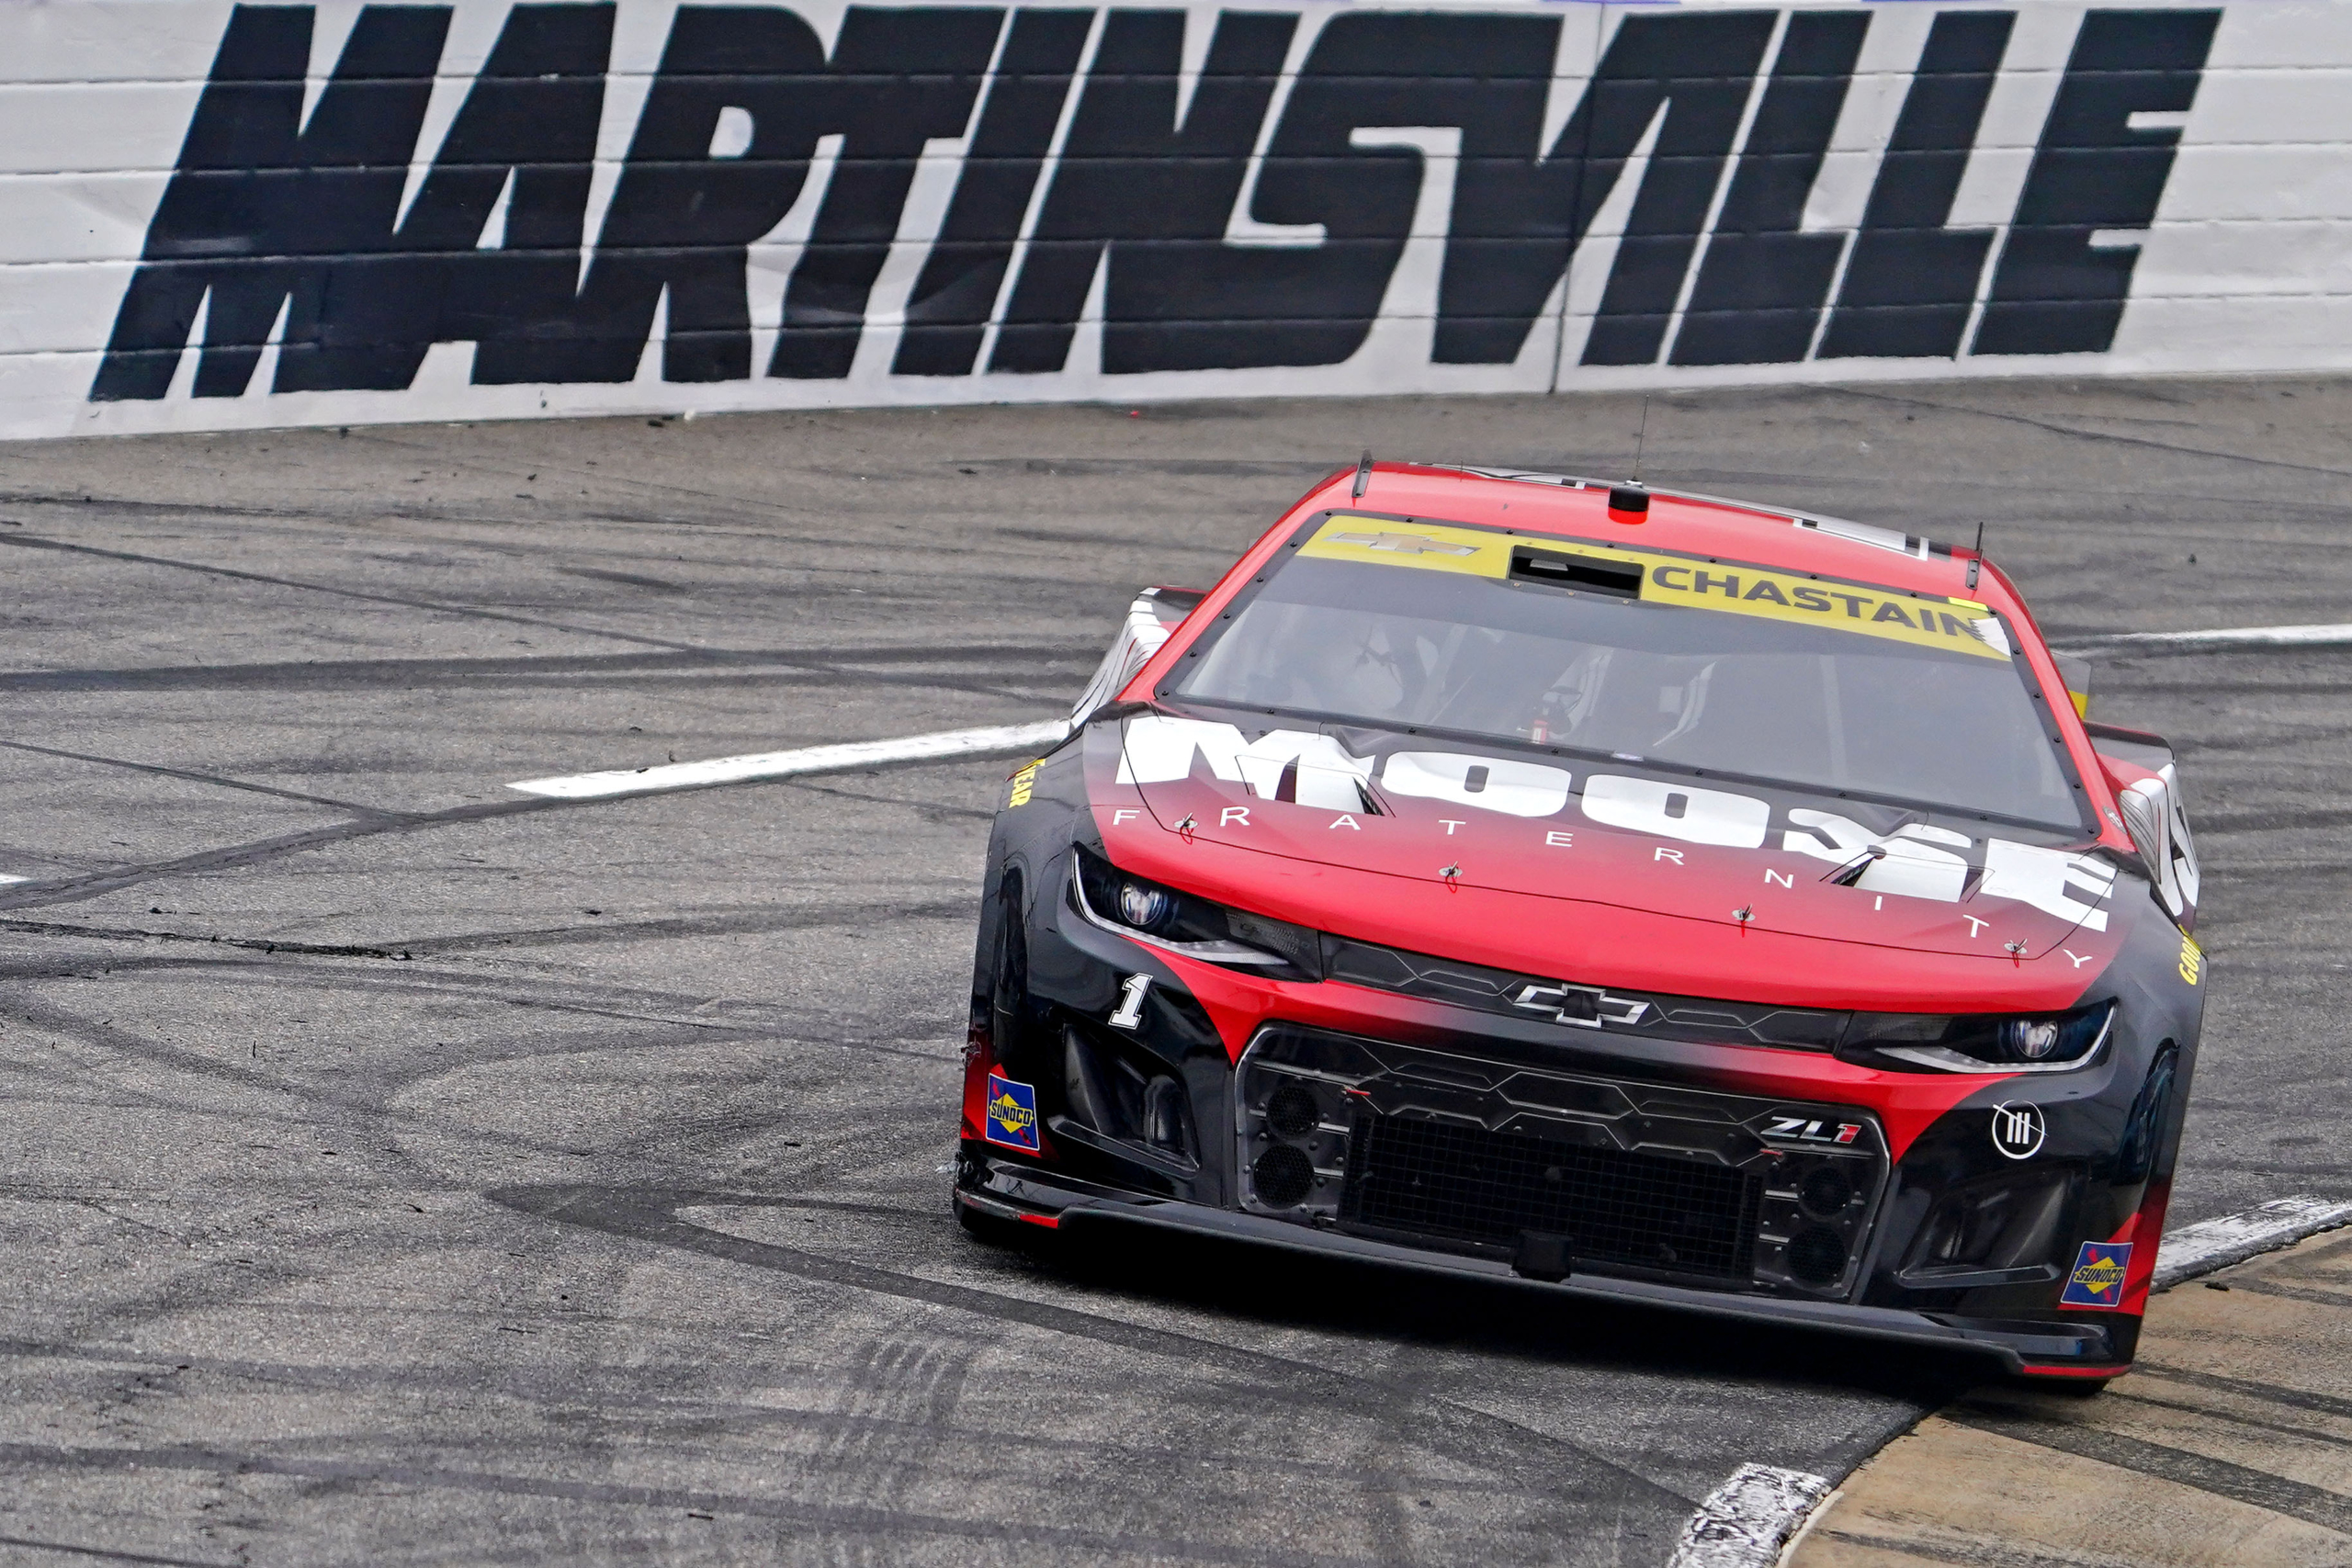 Evaluating Ross Chastain’s big video game move at Martinsville